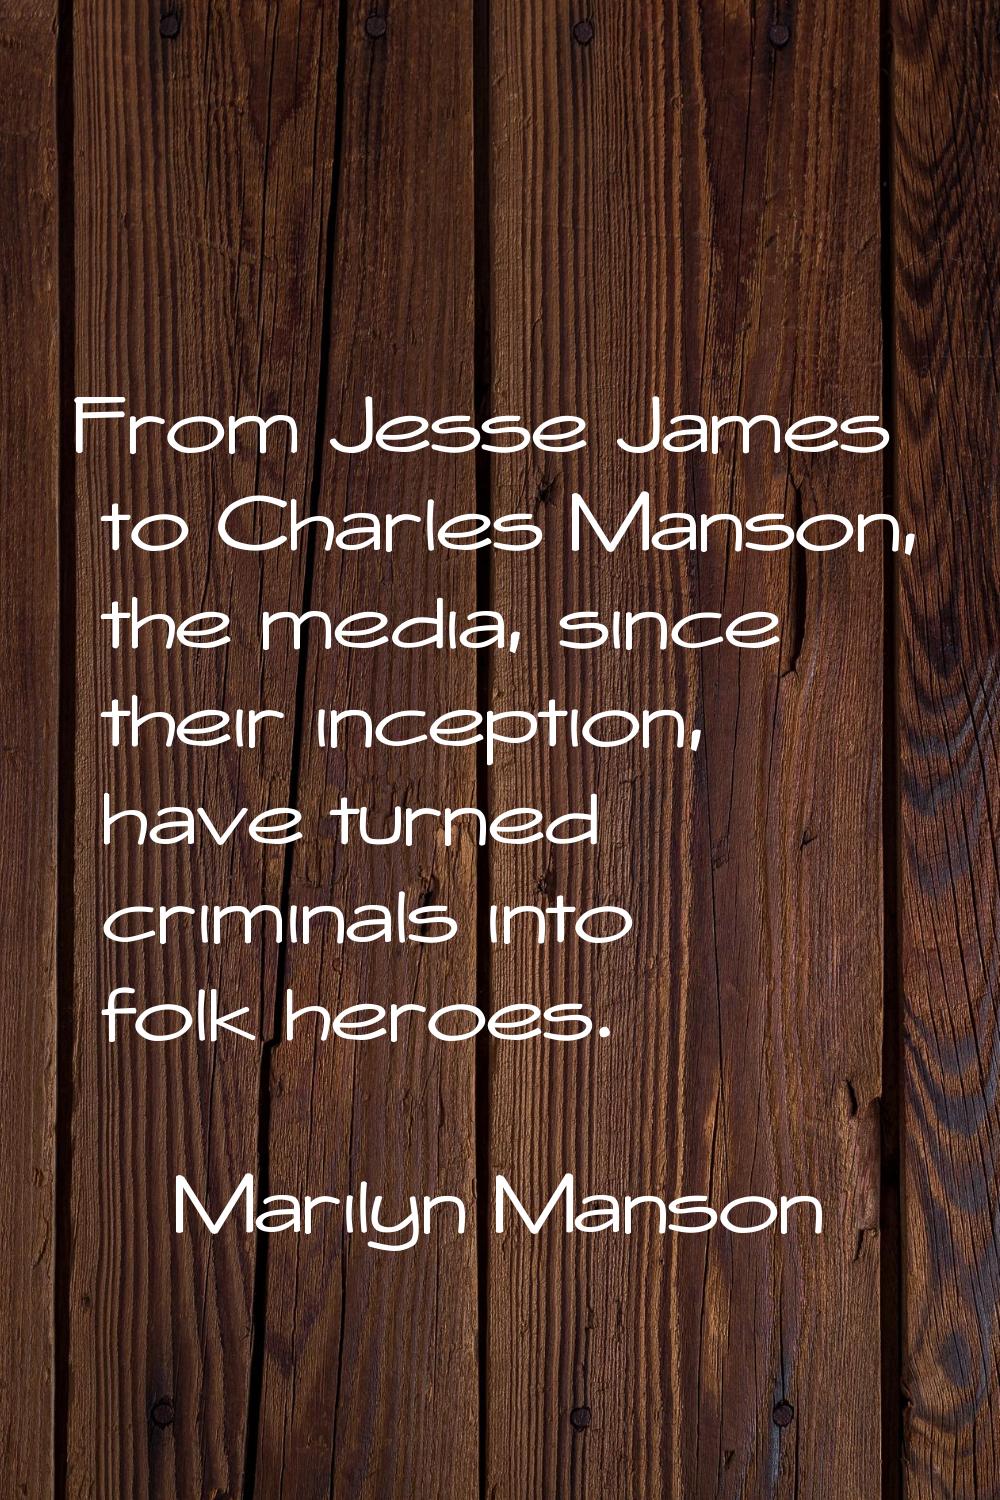 From Jesse James to Charles Manson, the media, since their inception, have turned criminals into fo